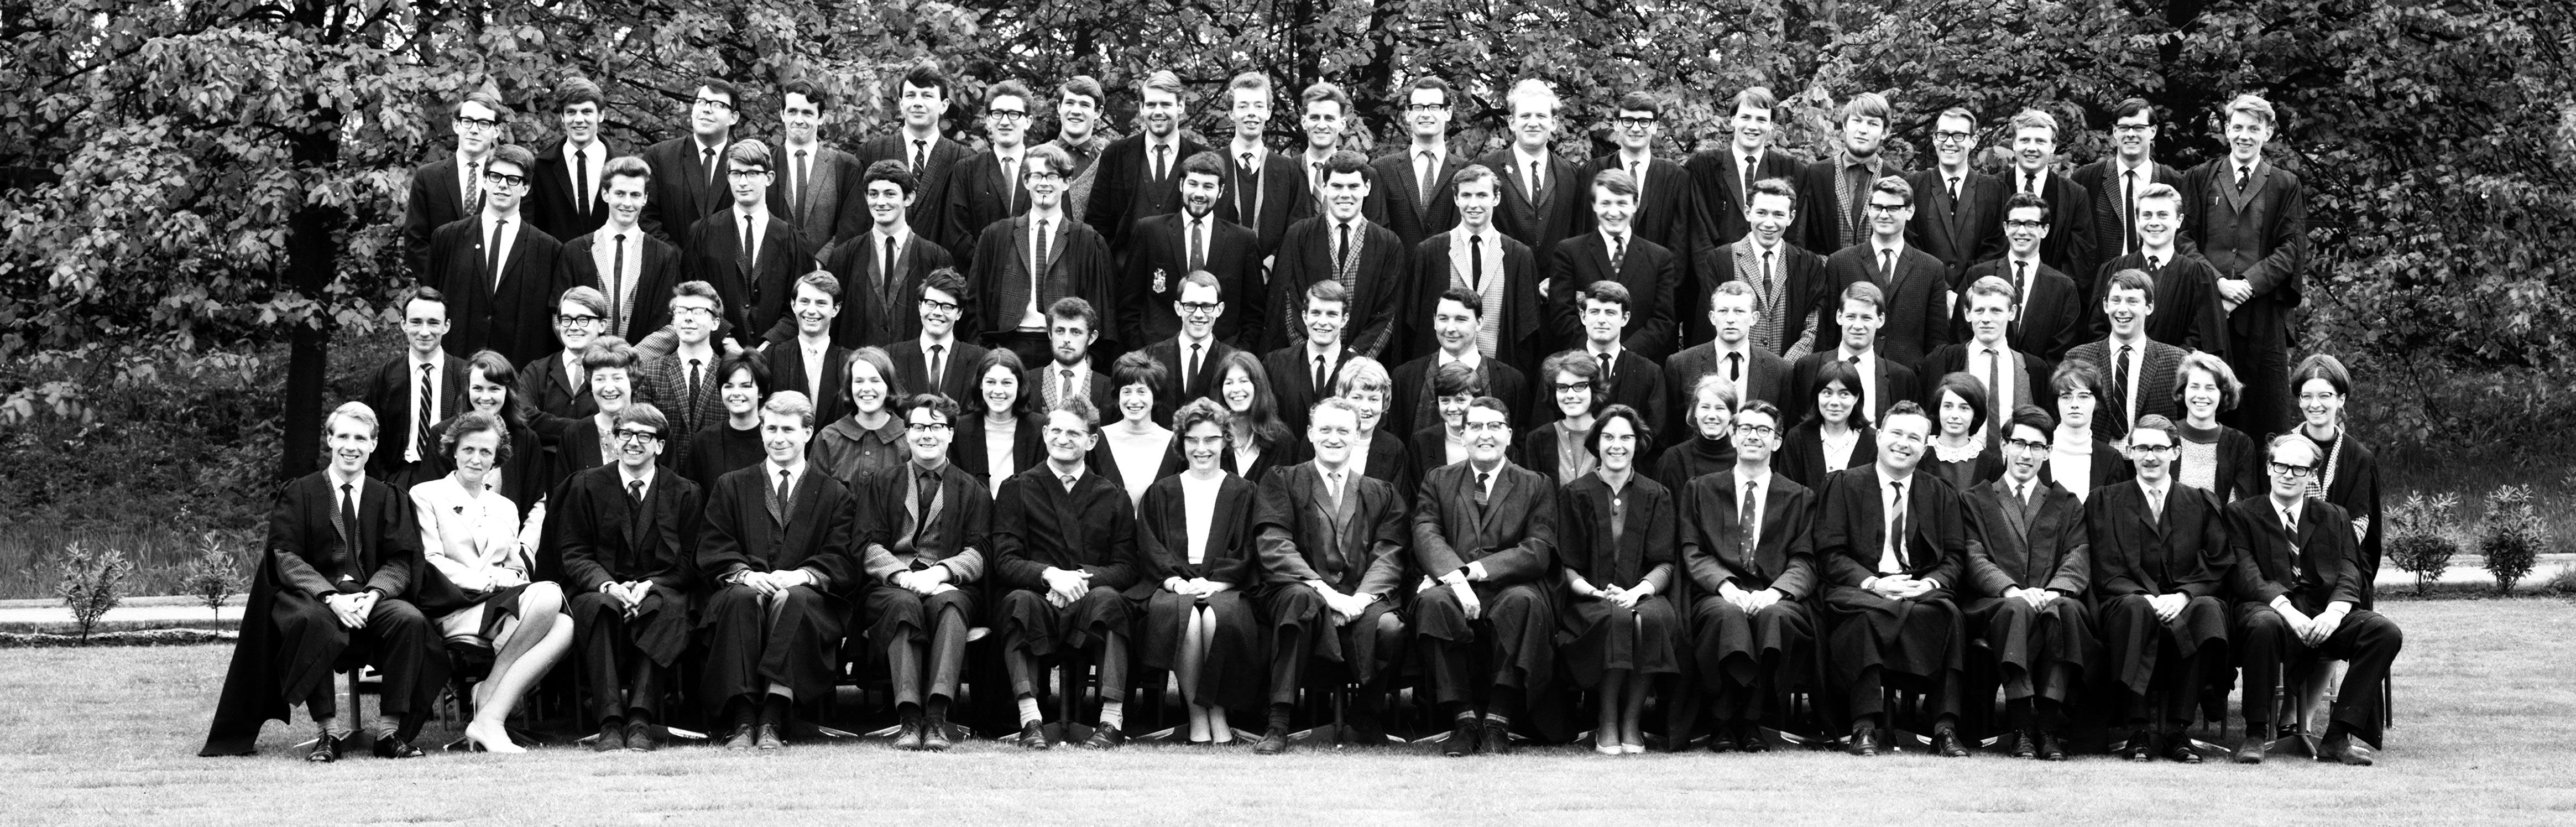 Geography Department Undergraduate Group photo from 1966